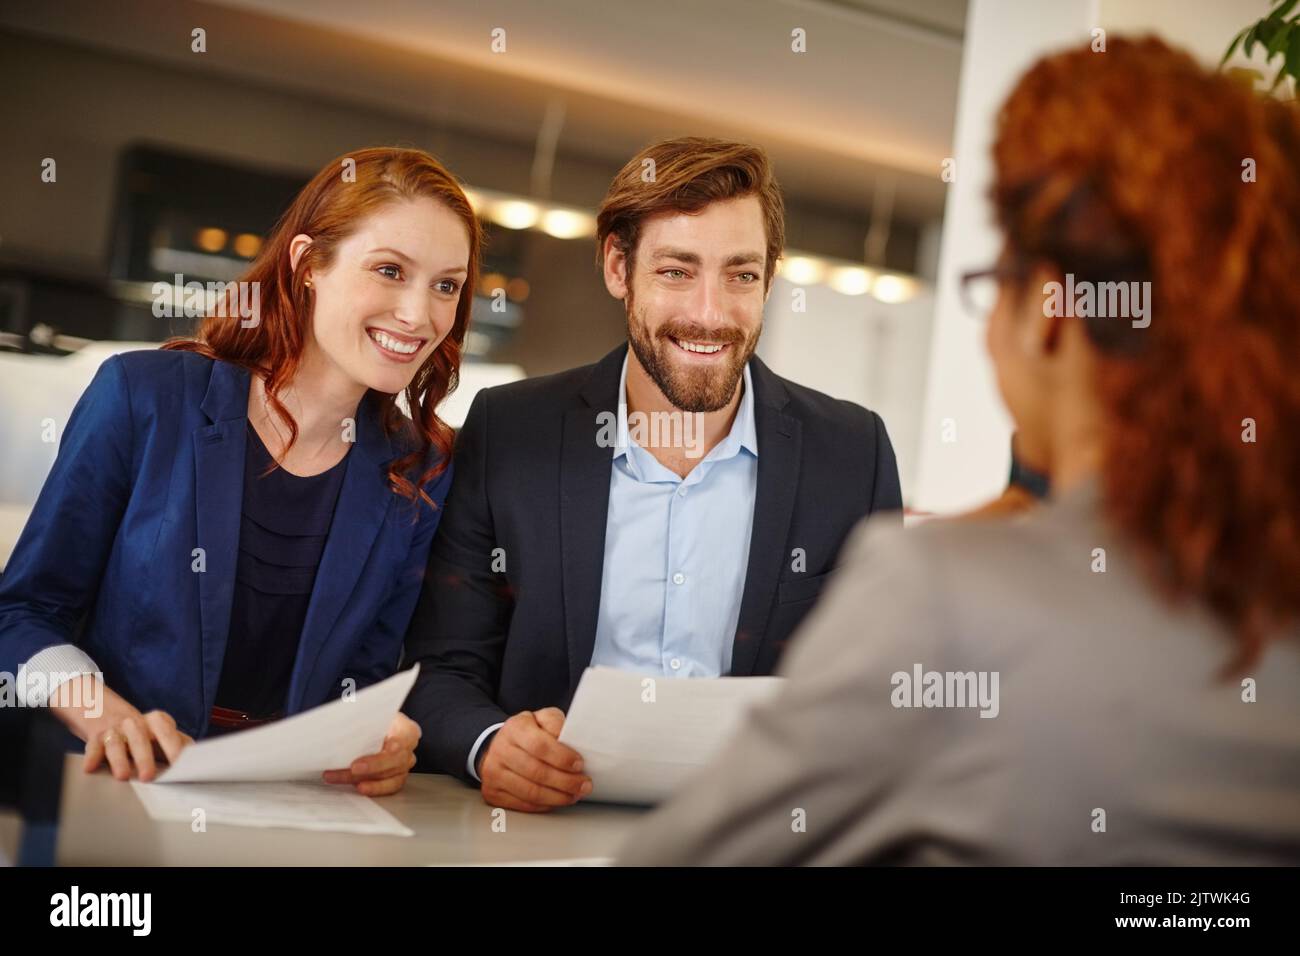 They like what she has to say. colleagues having a face to face meeting with a woman at work. Stock Photo